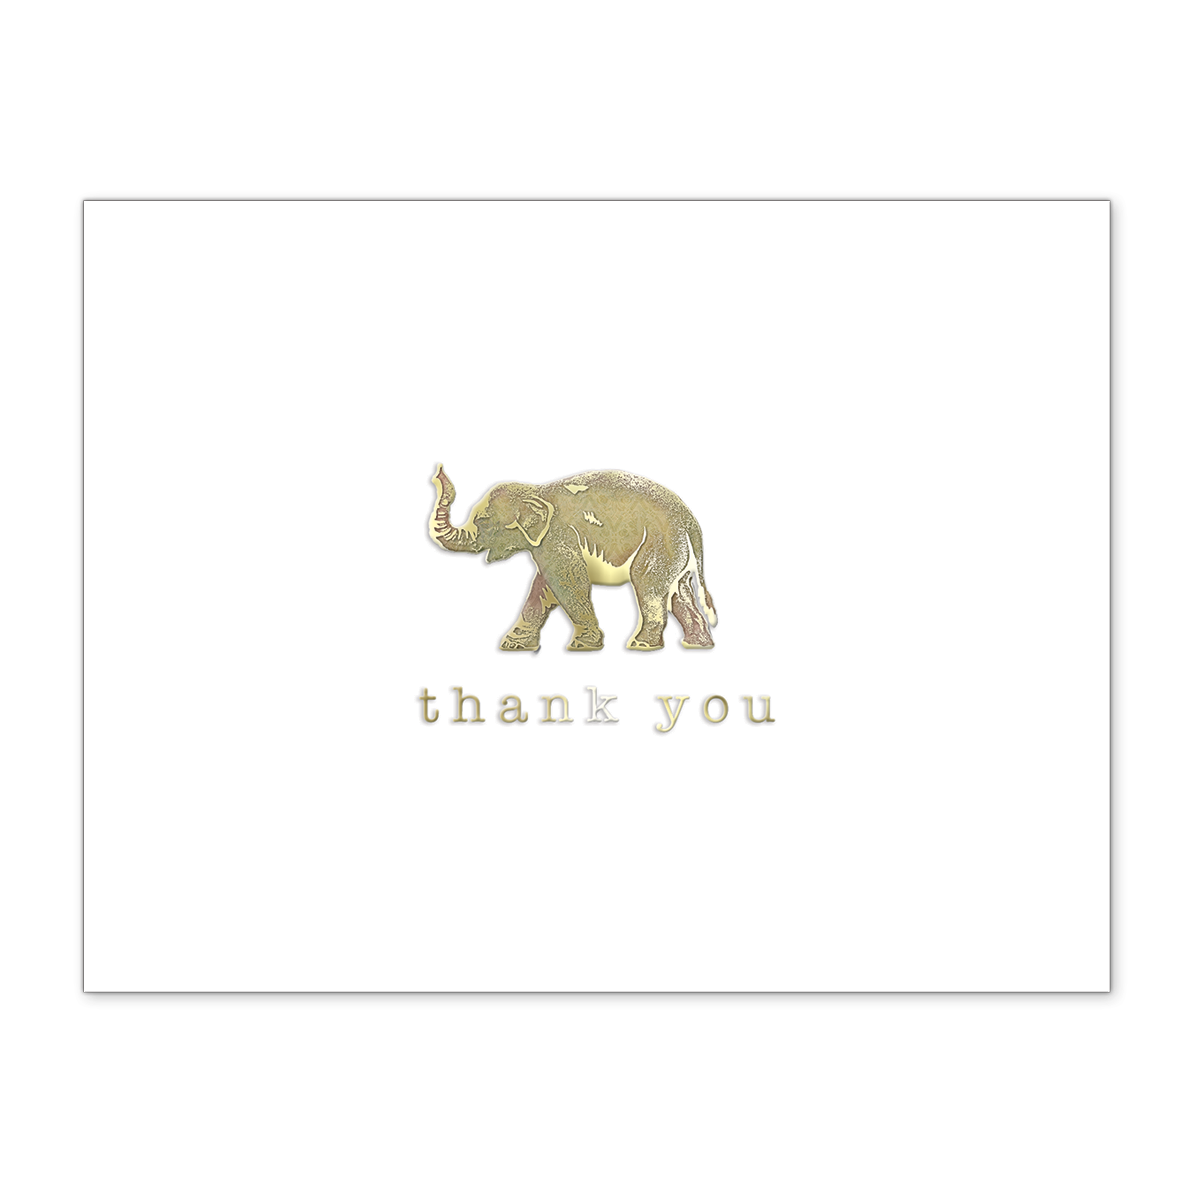 Details about   PUNCH STUDIO GOLD FOIL PEACOCK  THANK YOU NOTECARDS WITH ENVELOPES BOX OF 12 